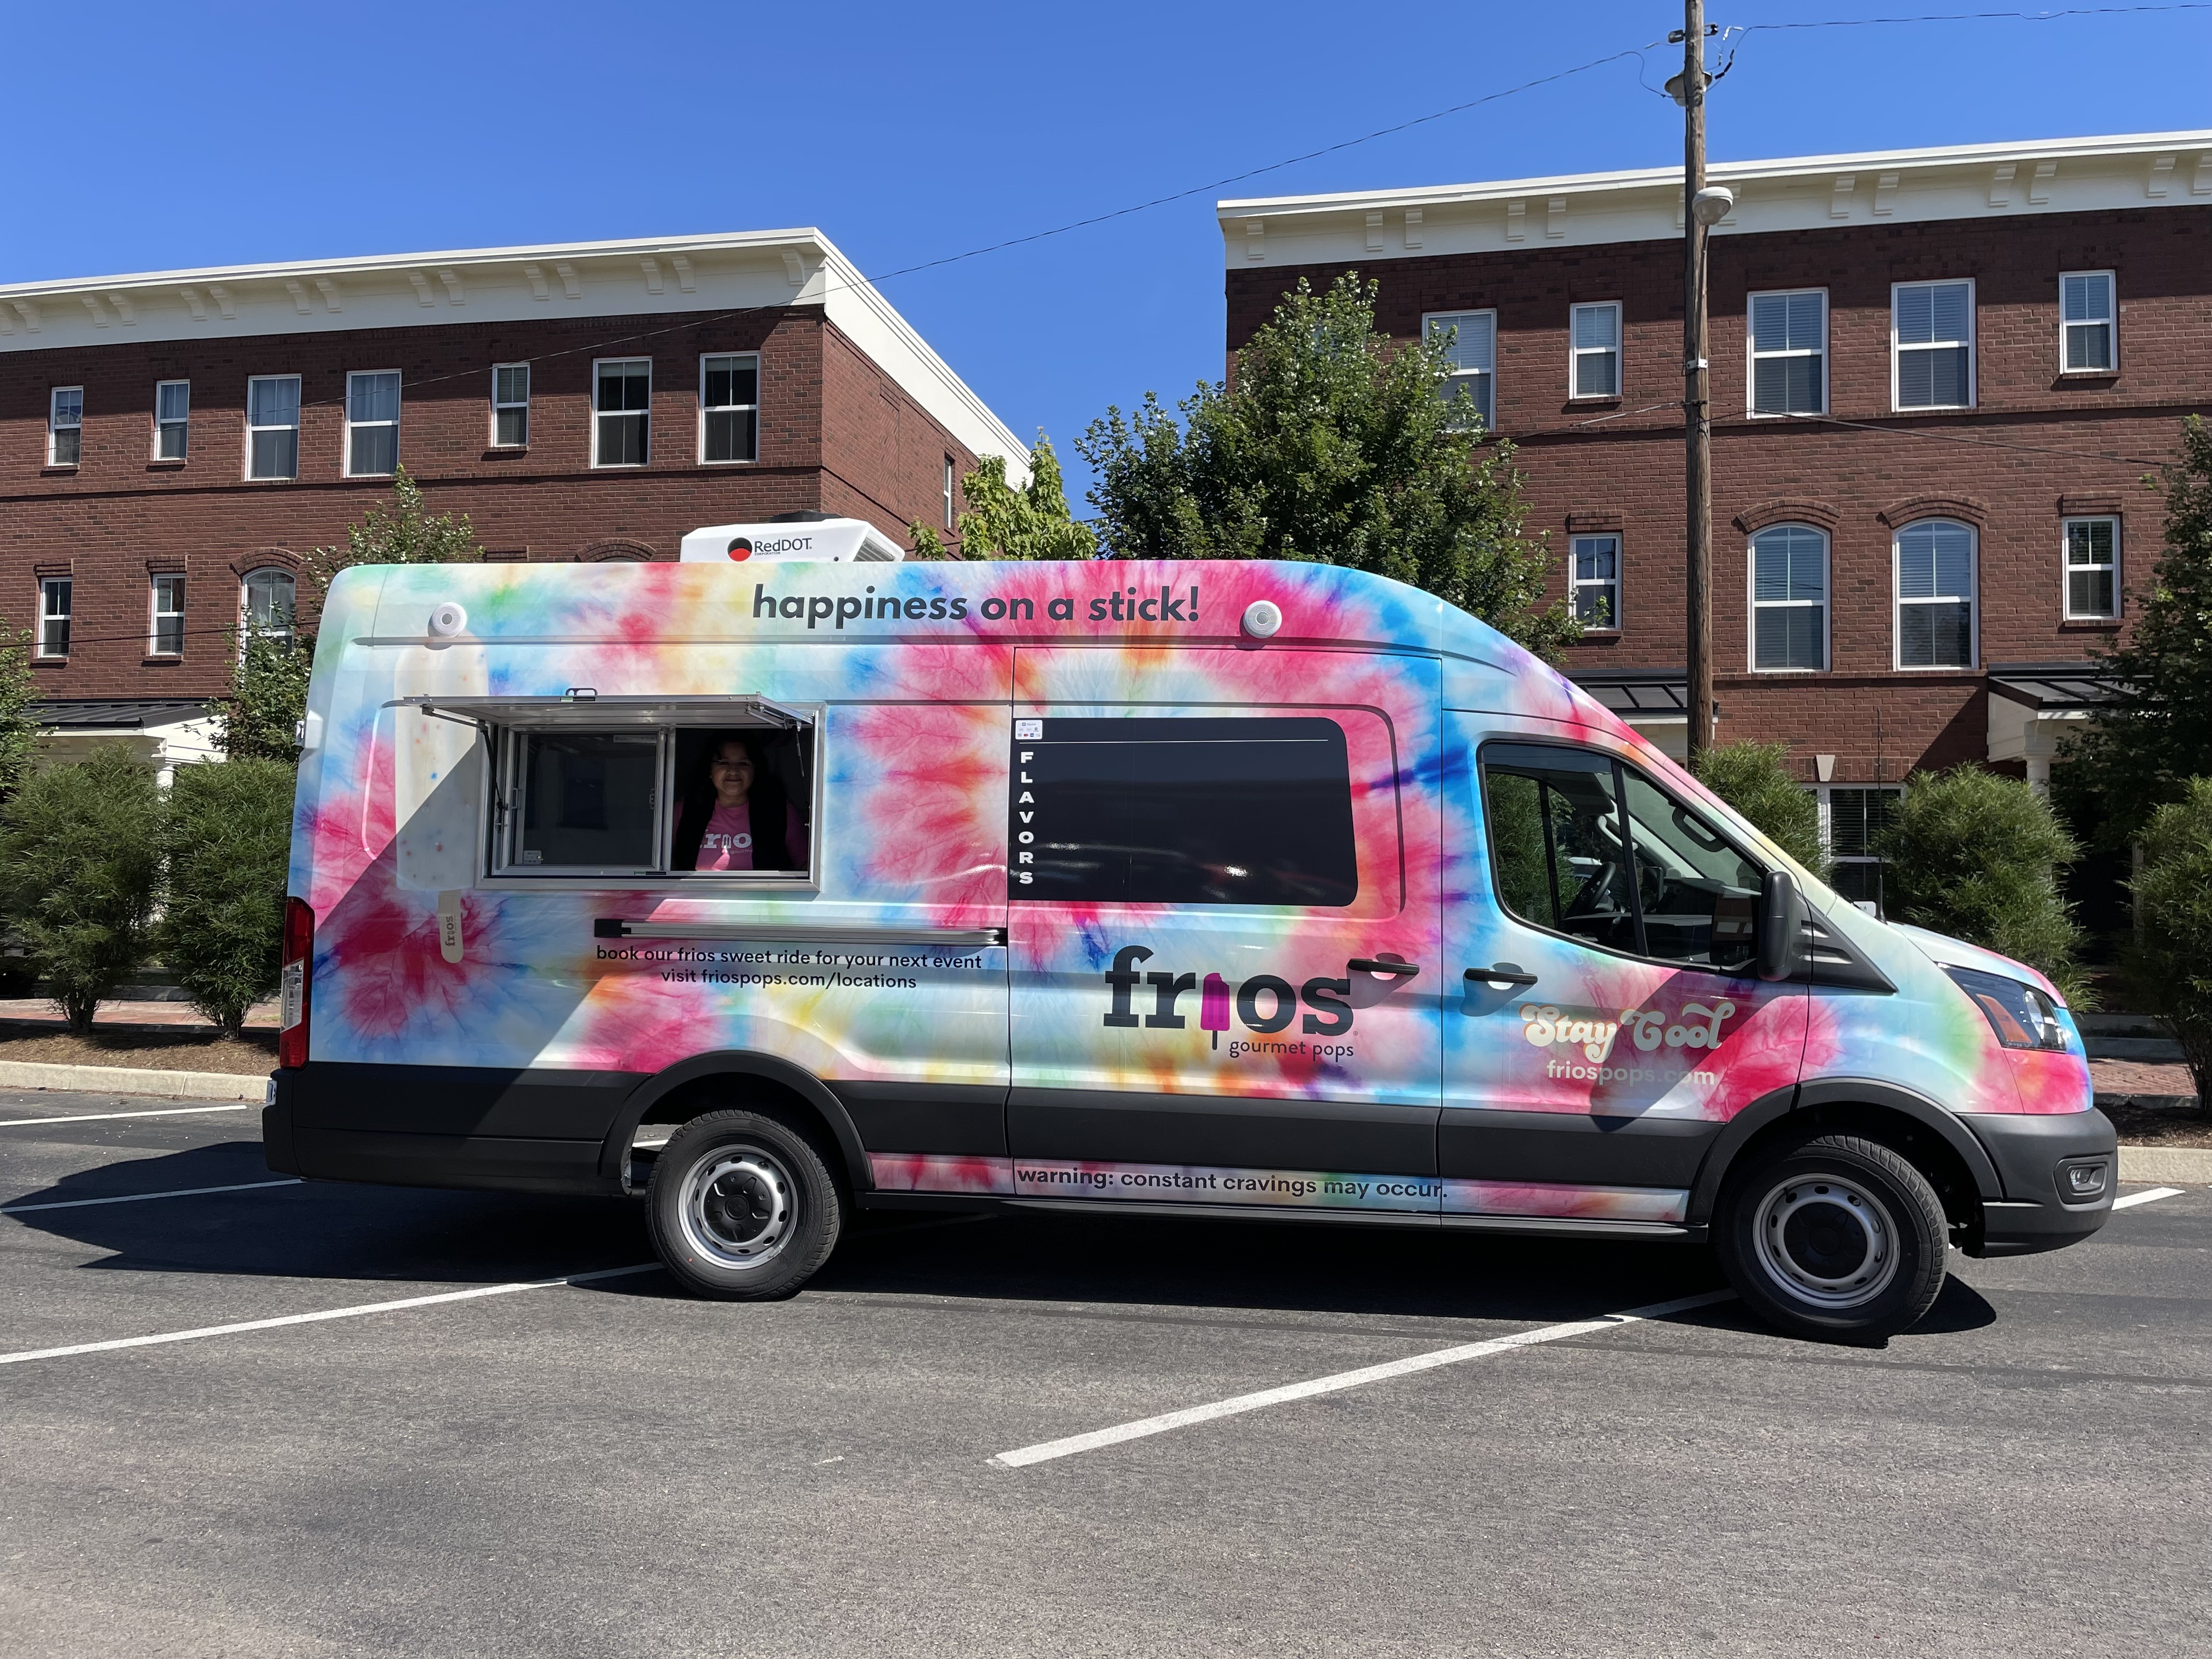 Frios Gourmet Pops, specializing in fruity and creamy popsicles, is opening its first Ohio franchise in the Dayton area.